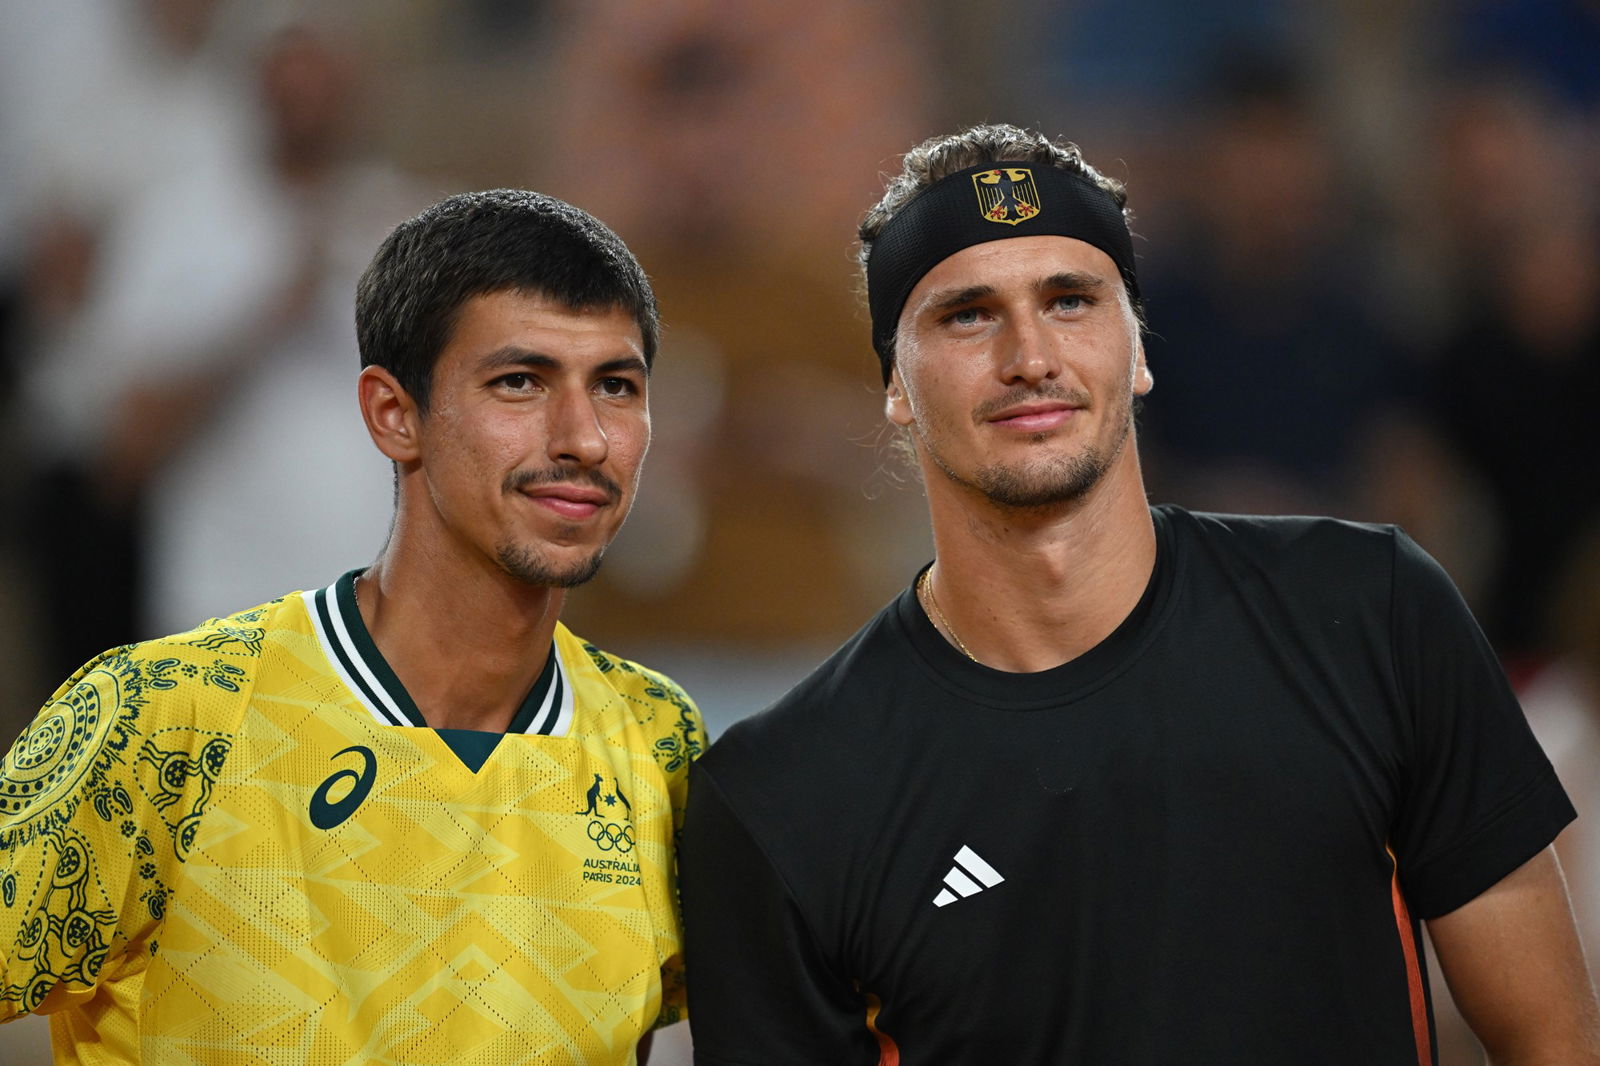 Australia's Alexei Popyrin and Germany's Alex Zverev pose for a picture before their men's singles match at the Olympics.